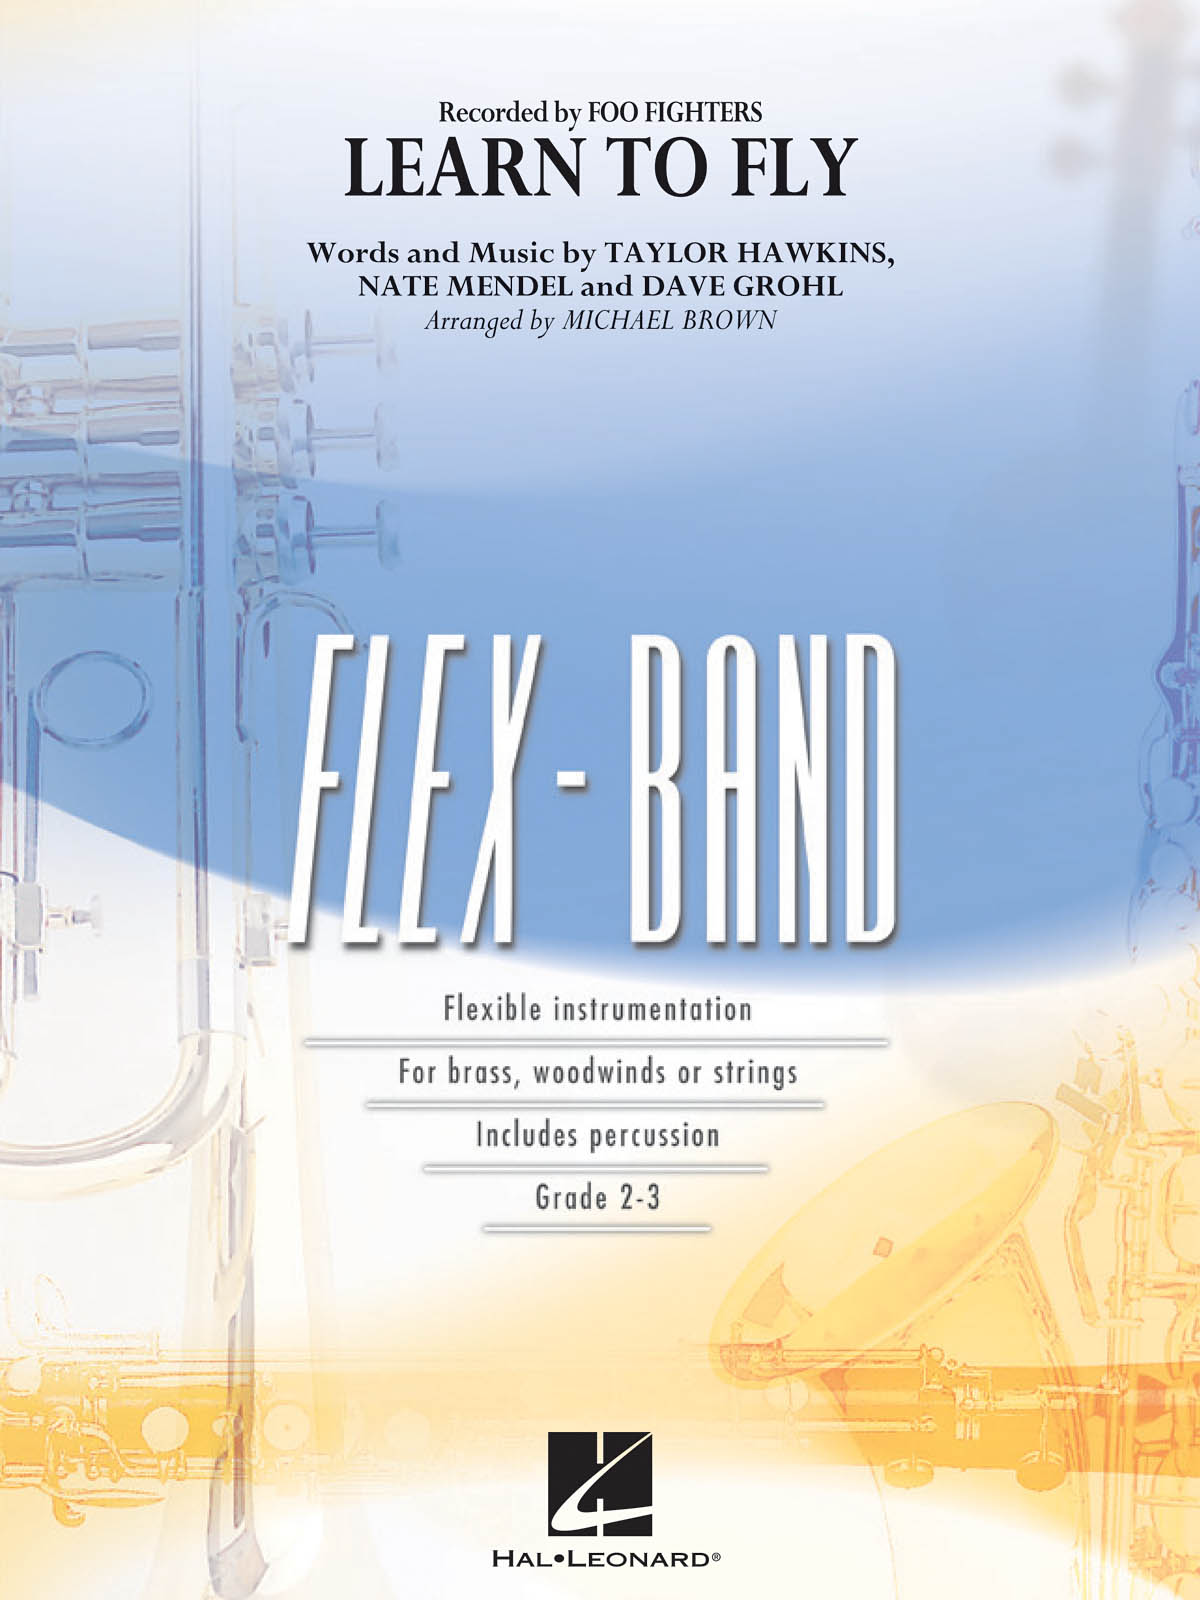 Taylor Hawkins Nate Mendel Dave Grohl: Learn to Fly: Concert Band: Score & Parts